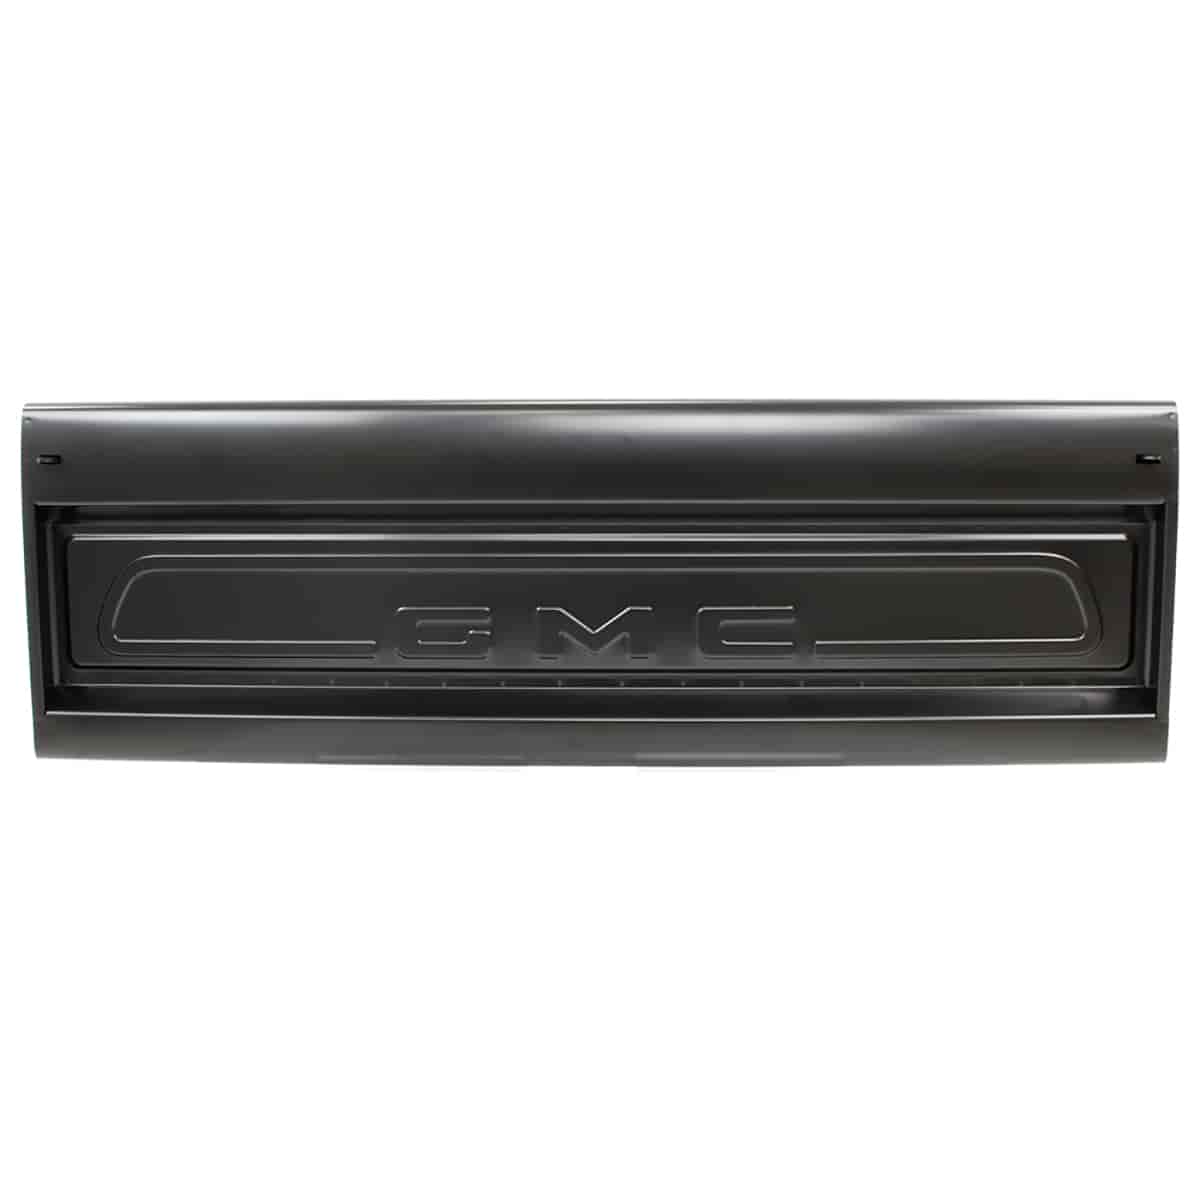 Tailgate for 1958-1966 GMC Fleetside Truck Bed with Embossed "GMC" Letters